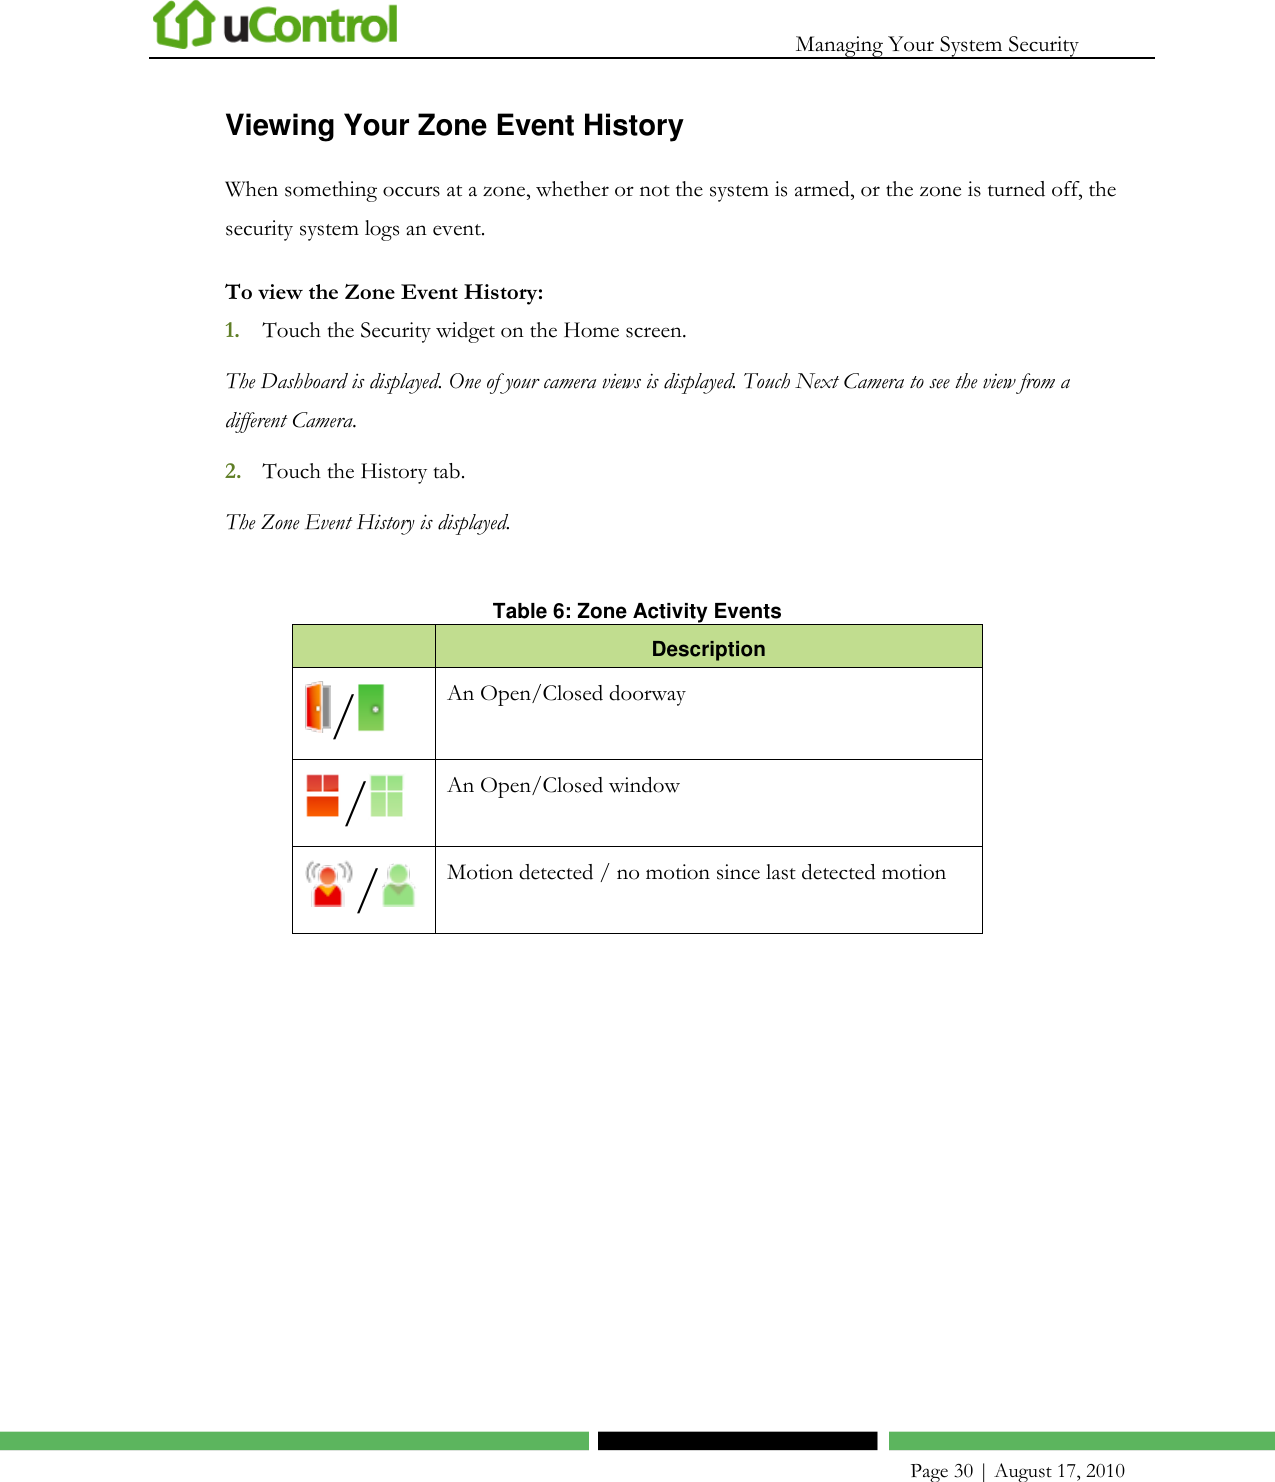   Managing Your System Security    Page 30 | August 17, 2010 Viewing Your Zone Event History When something occurs at a zone, whether or not the system is armed, or the zone is turned off, the security system logs an event. To view the Zone Event History: 1. Touch the Security widget on the Home screen. The Dashboard is displayed. One of your camera views is displayed. Touch Next Camera to see the view from a different Camera. 2. Touch the History tab. The Zone Event History is displayed.  Table 6: Zone Activity Events  Description / An Open/Closed doorway / An Open/Closed window / Motion detected / no motion since last detected motion  